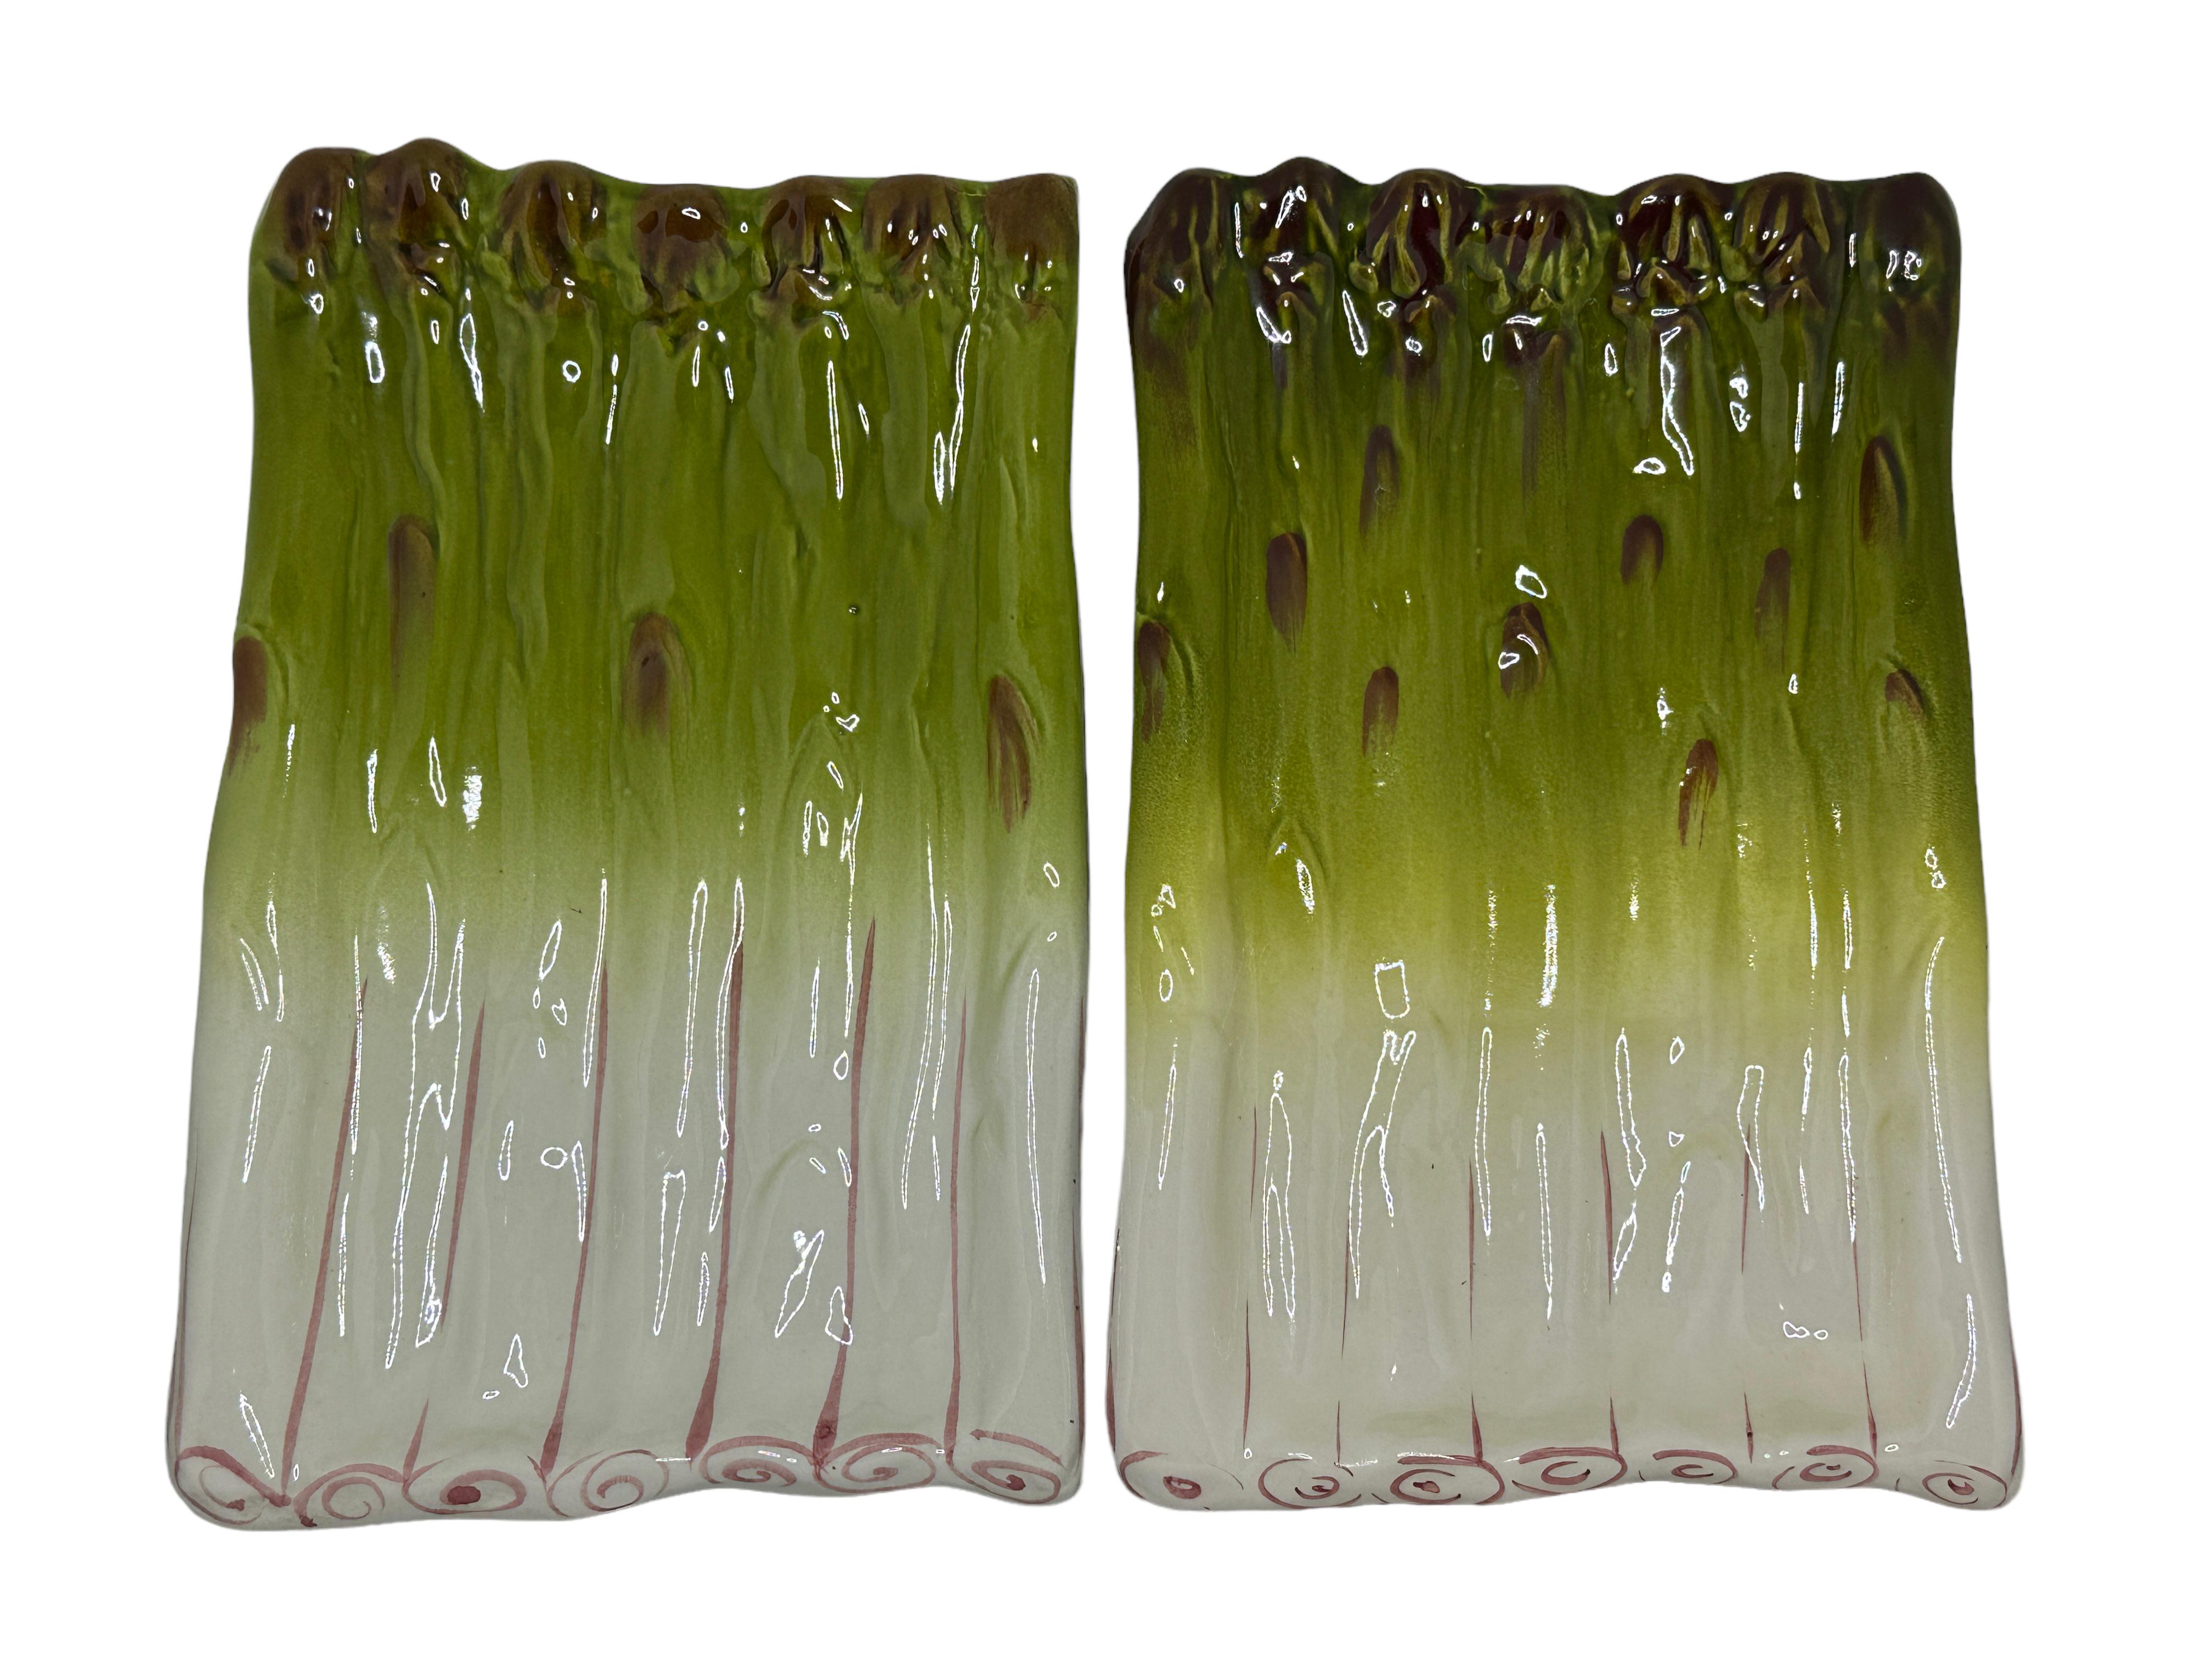 Modern Vintage Ceramic Faience Majolica Asparagus Set of Six Plates, Italy 1980s For Sale